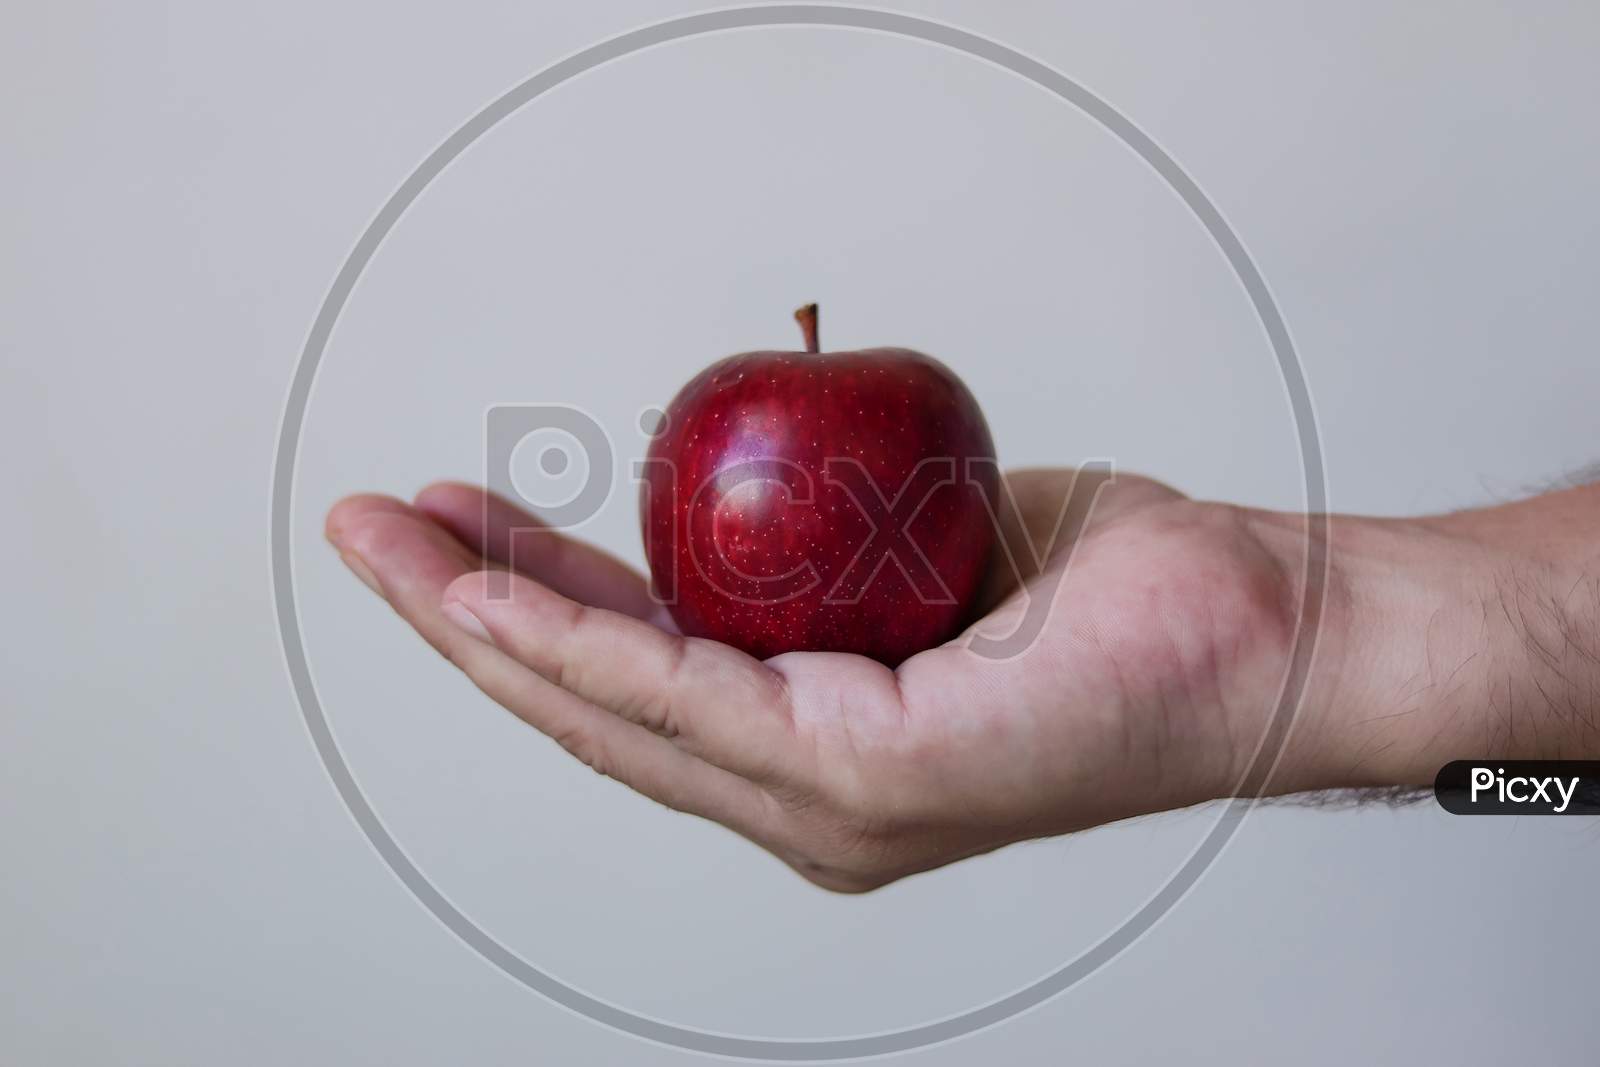 Man holding a apple in hand white isolated background.